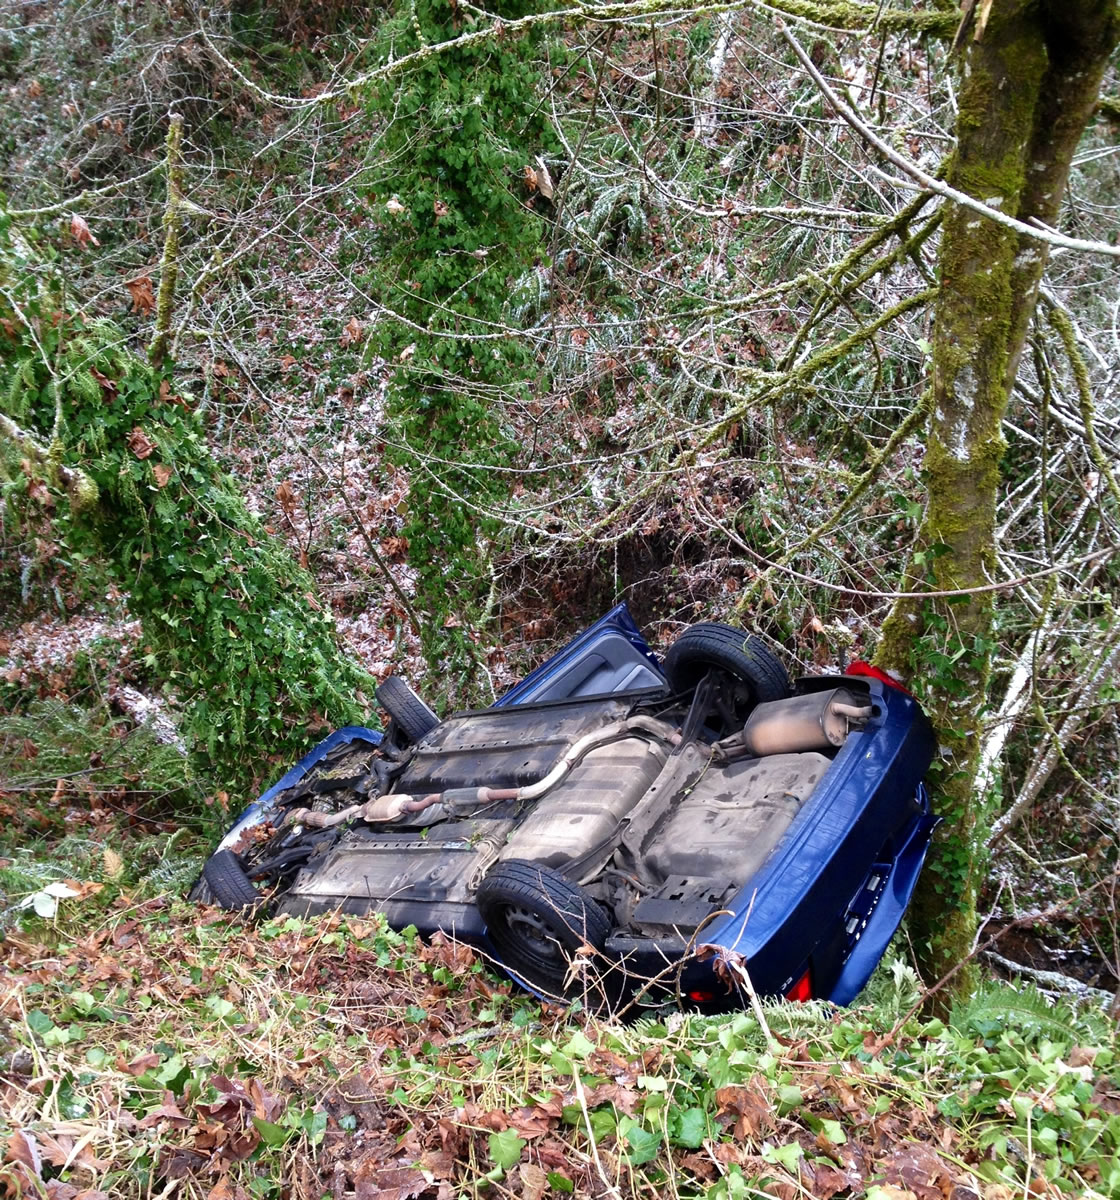 Firefighters found this vehicle suspended between two trees over an embankment near Northwest Coyote Ridge Road and Northwest 21st Avenue in La Center.